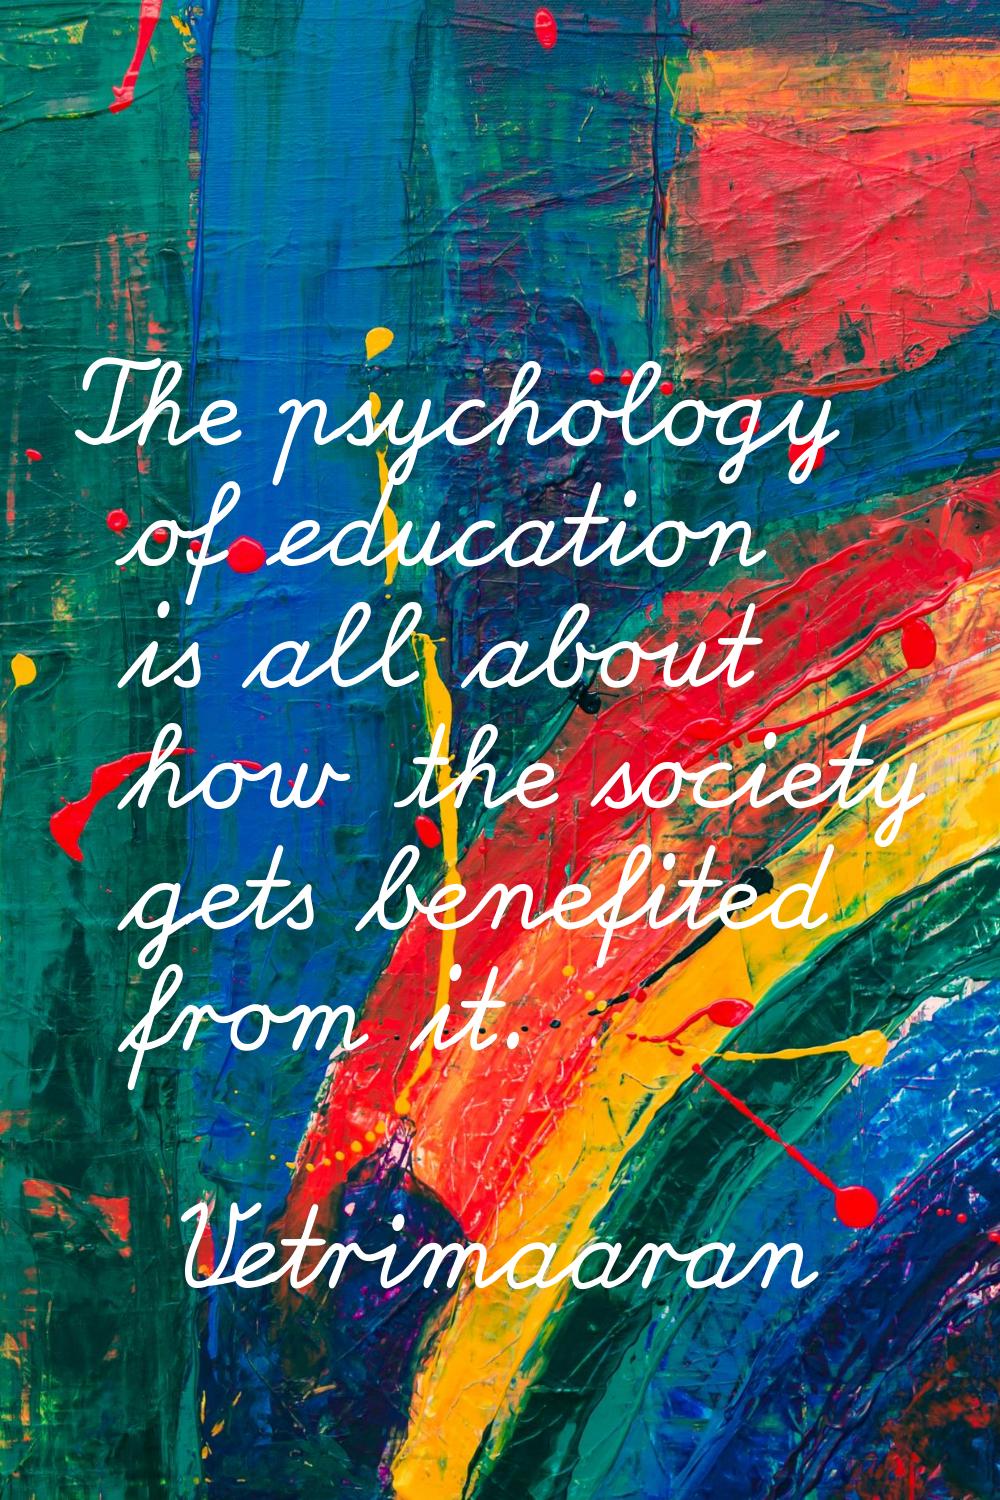 The psychology of education is all about how the society gets benefited from it.